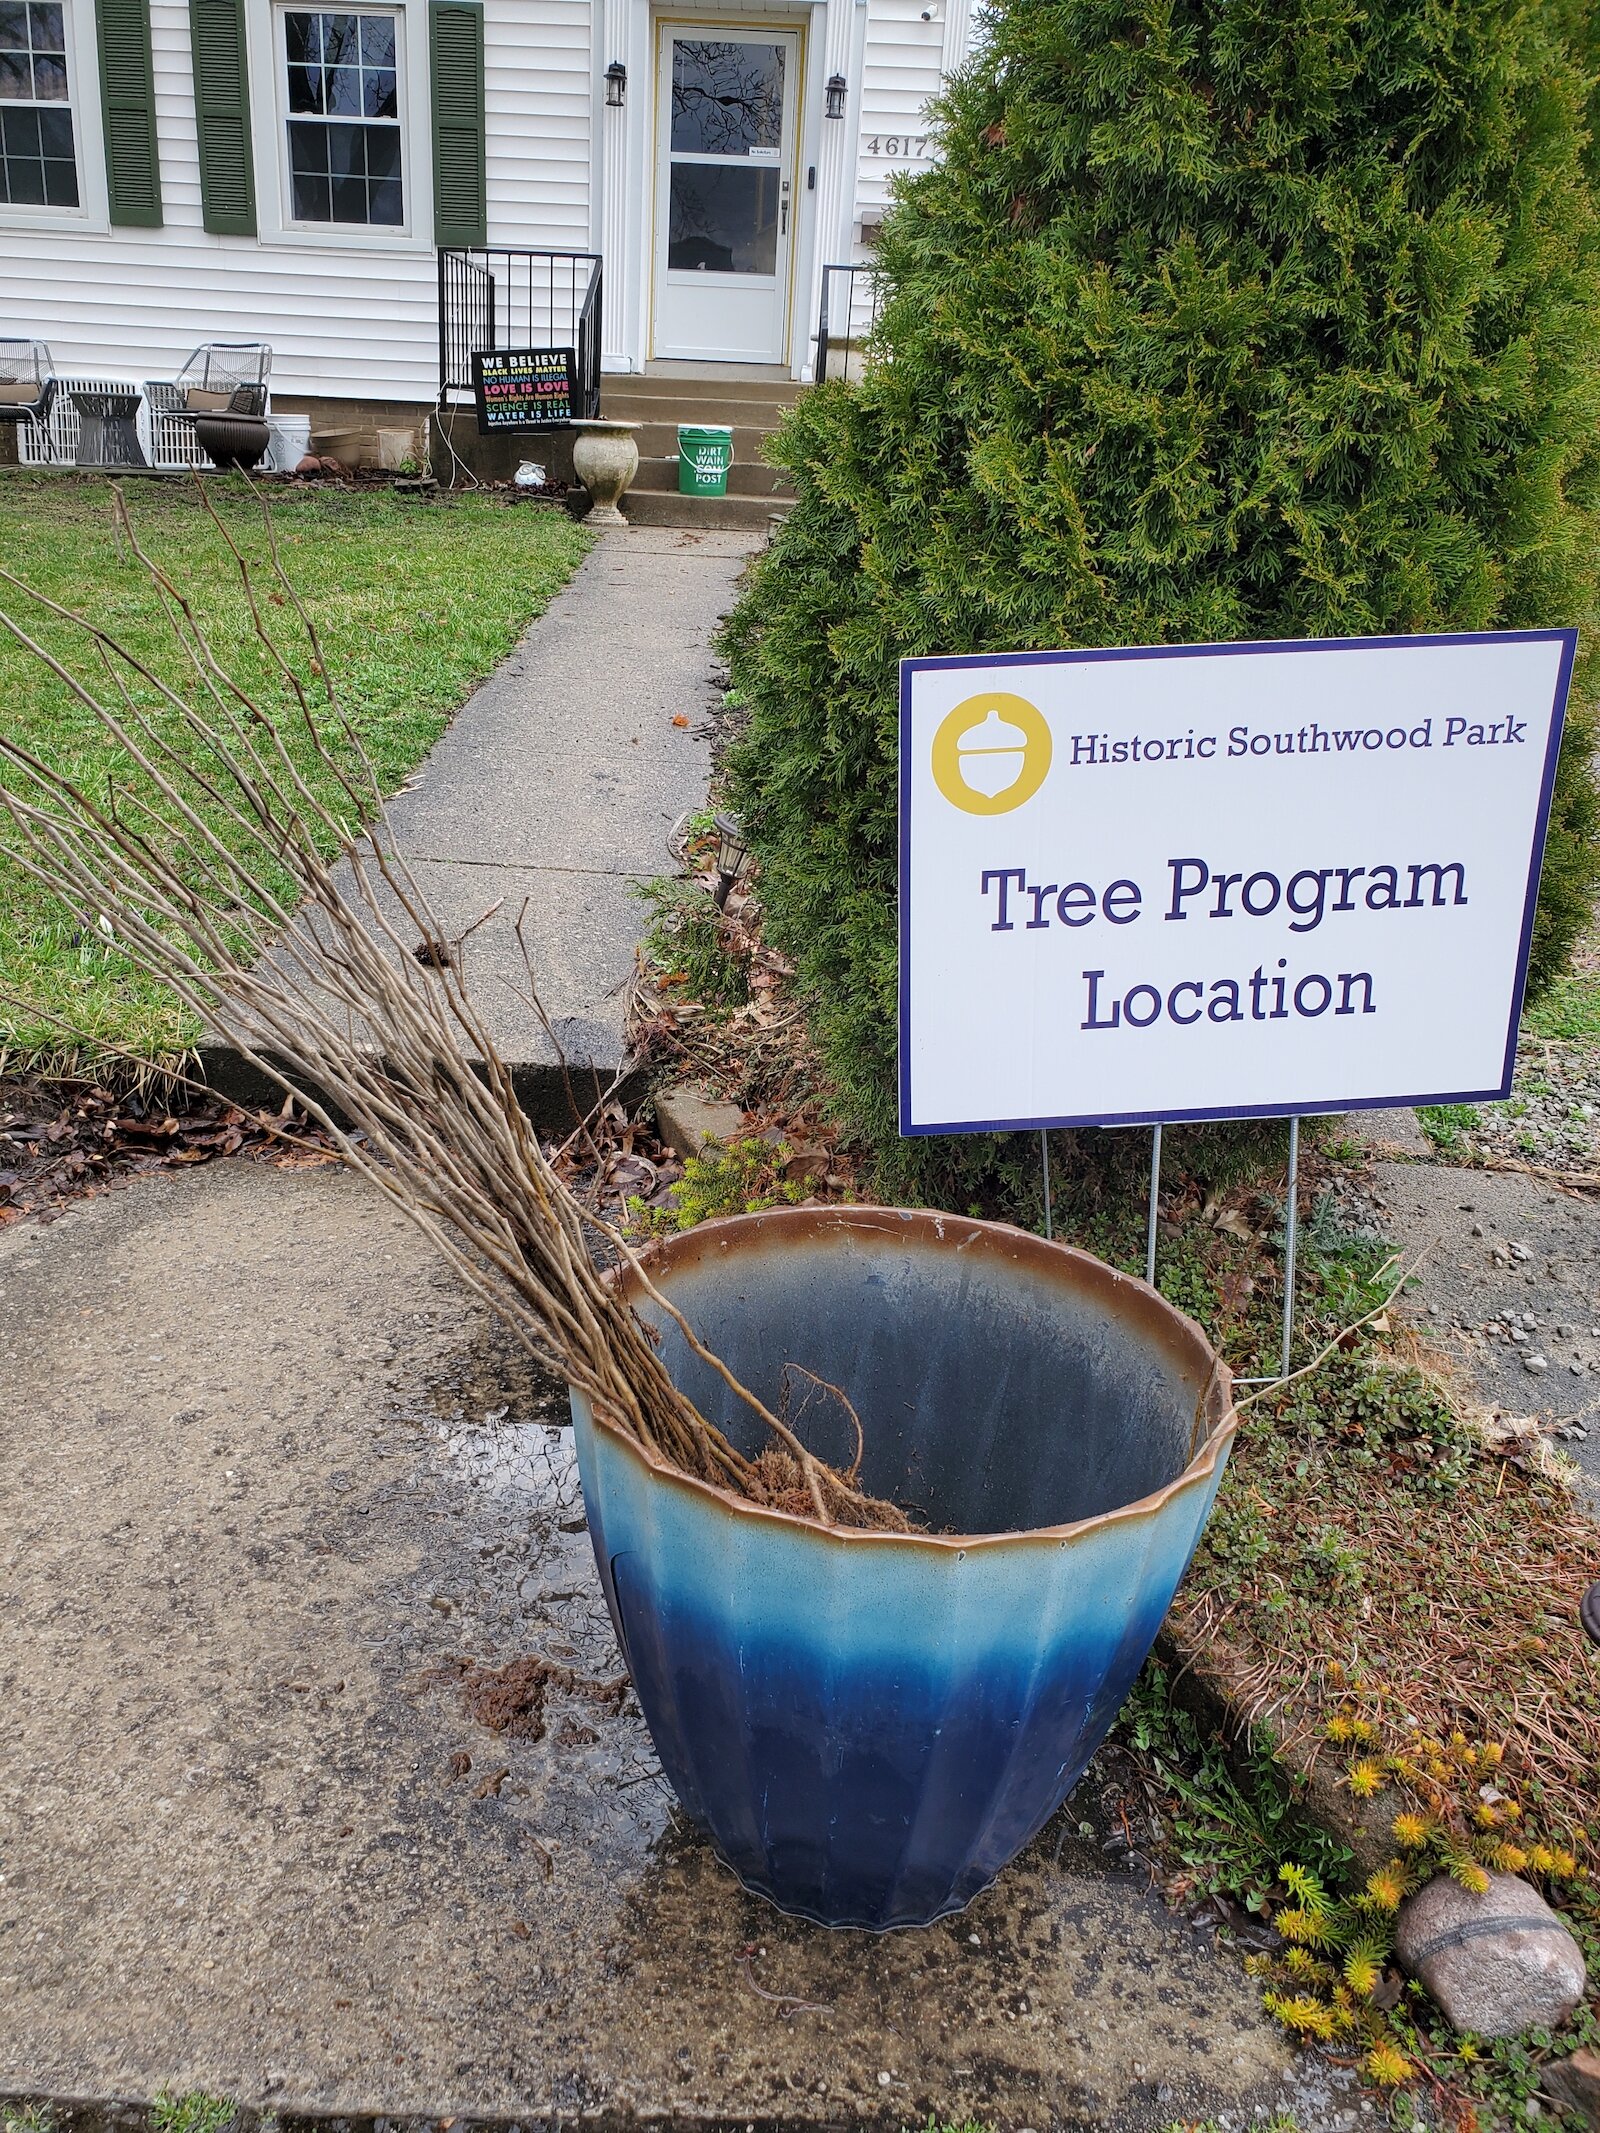 The Southwood Park Beautification Committee orders tree seedlings from an Indiana DNR program, which allows the neighborhood to give away free native tree seedlings to neighbors who want to plant trees in their yards.